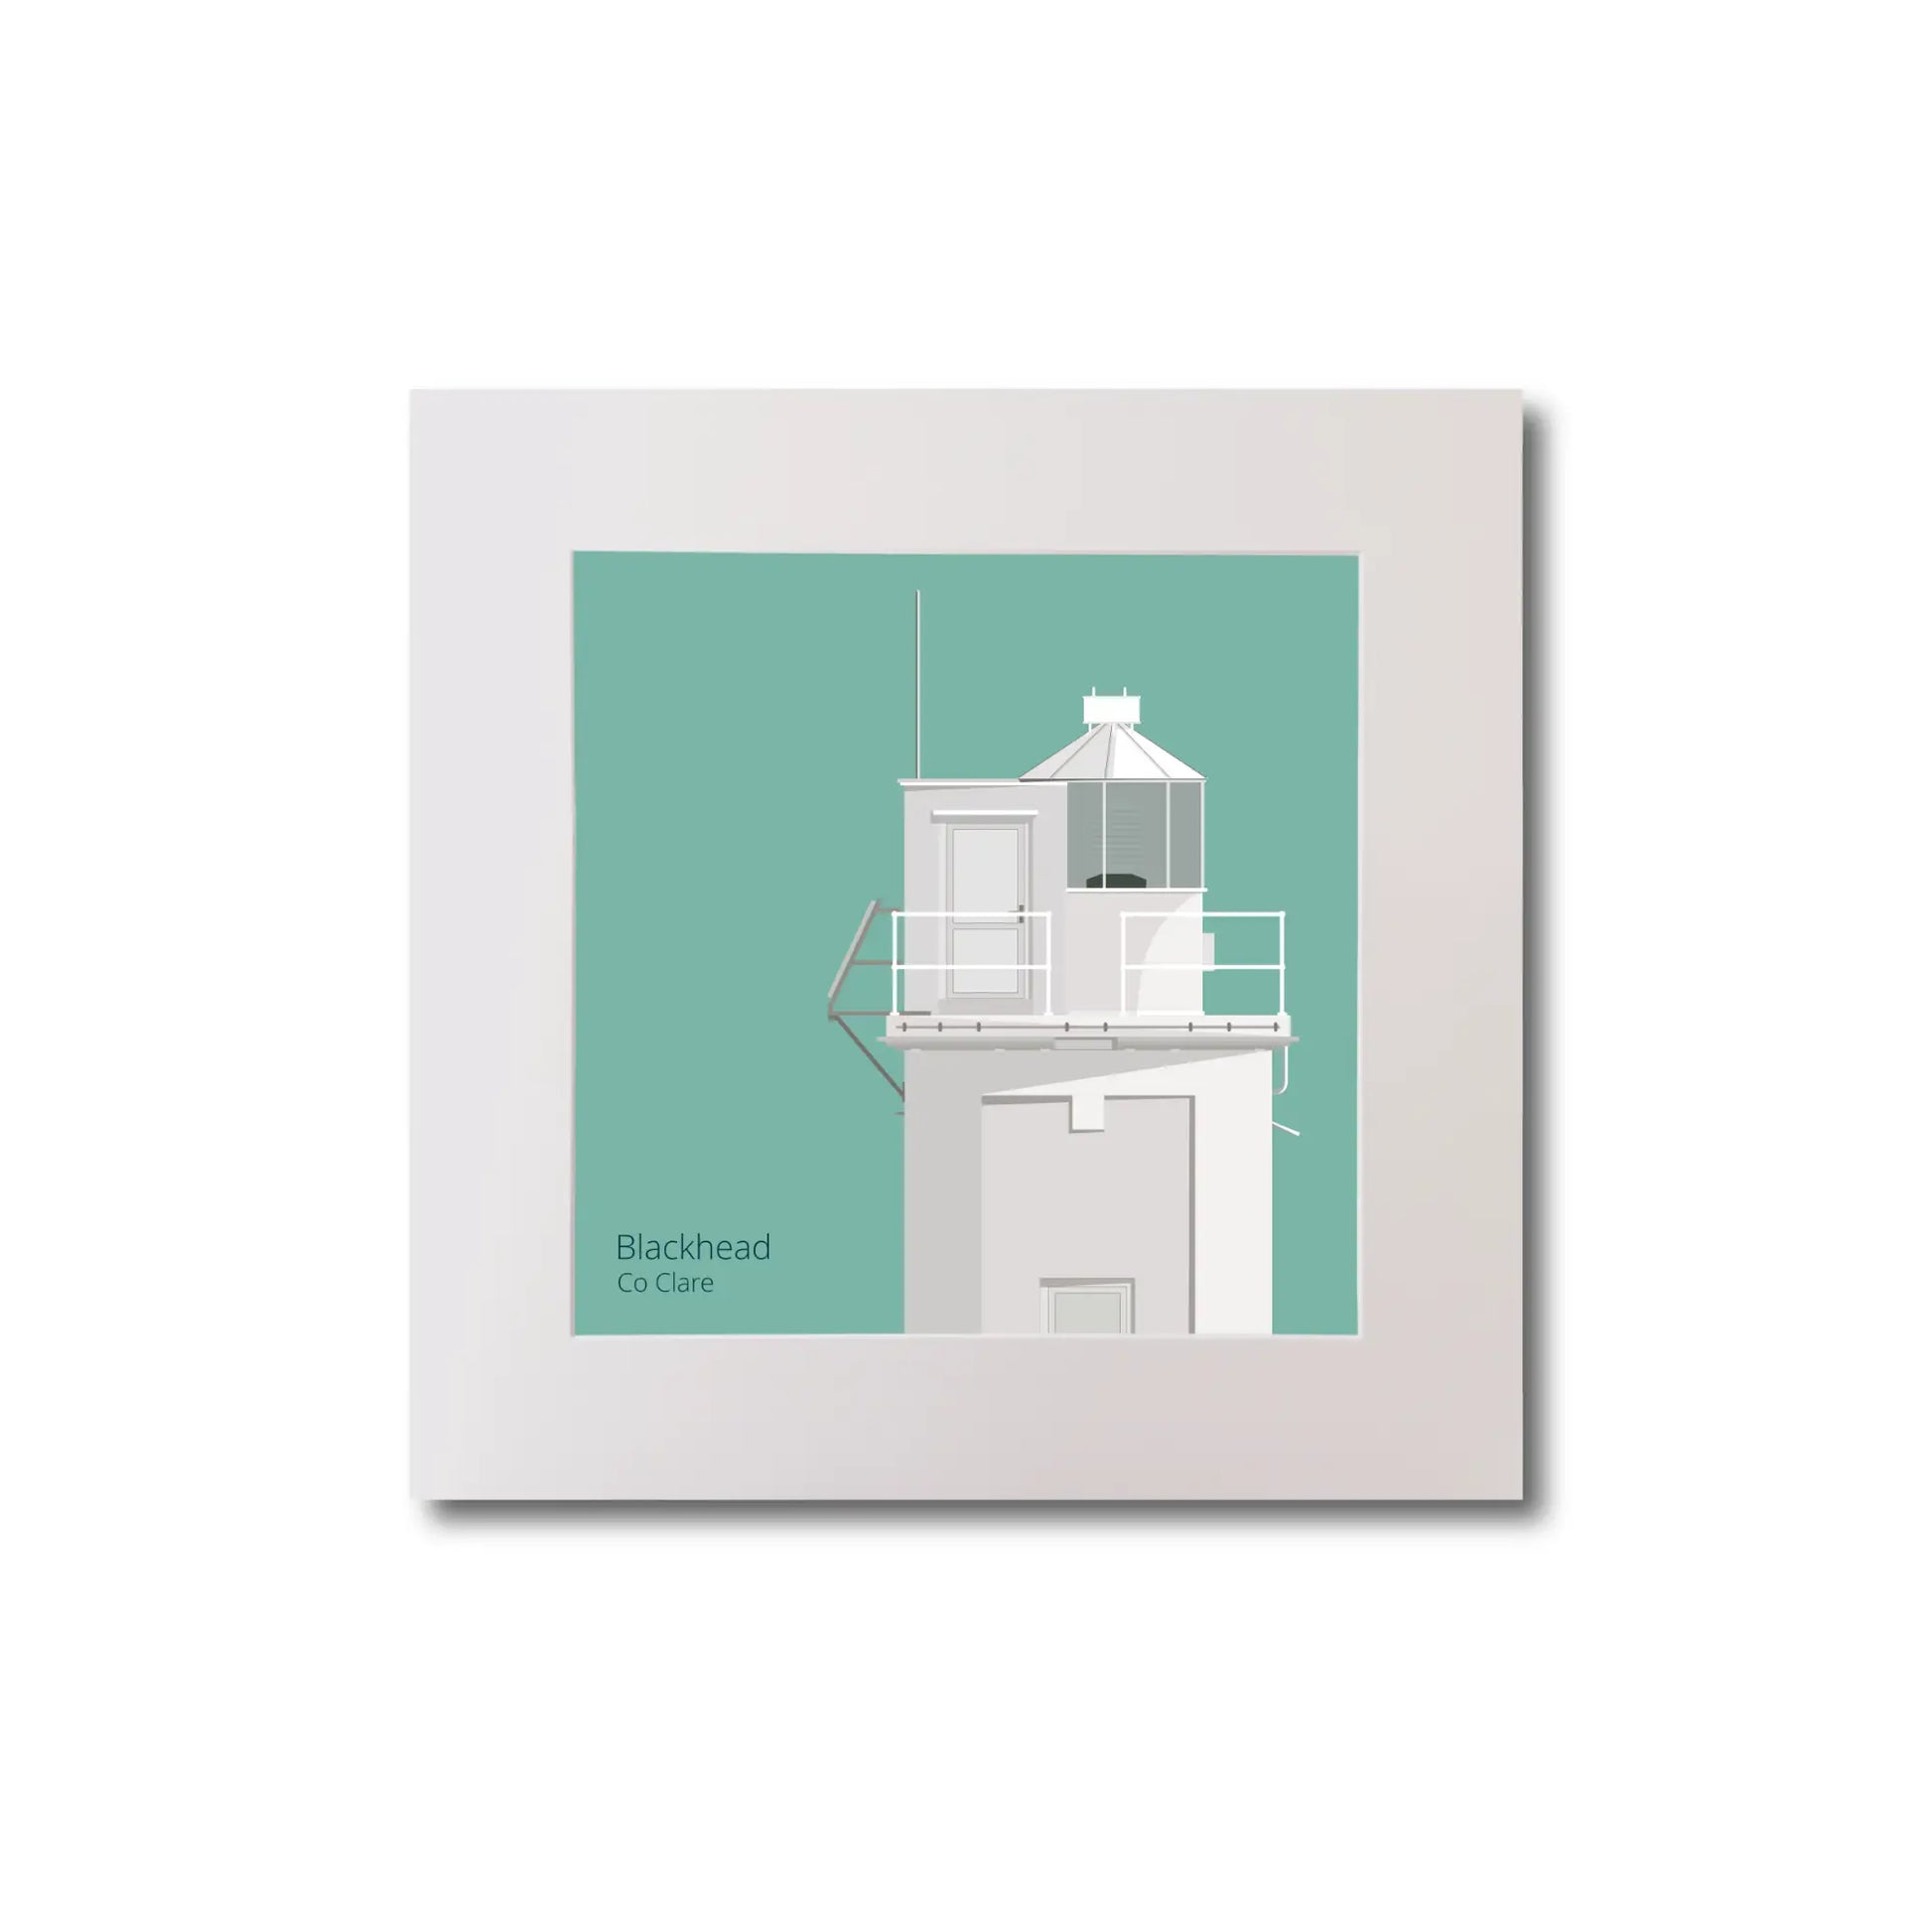 Illustration of Blackhead lighthouse on an ocean green background, mounted and measuring 20x20cm.